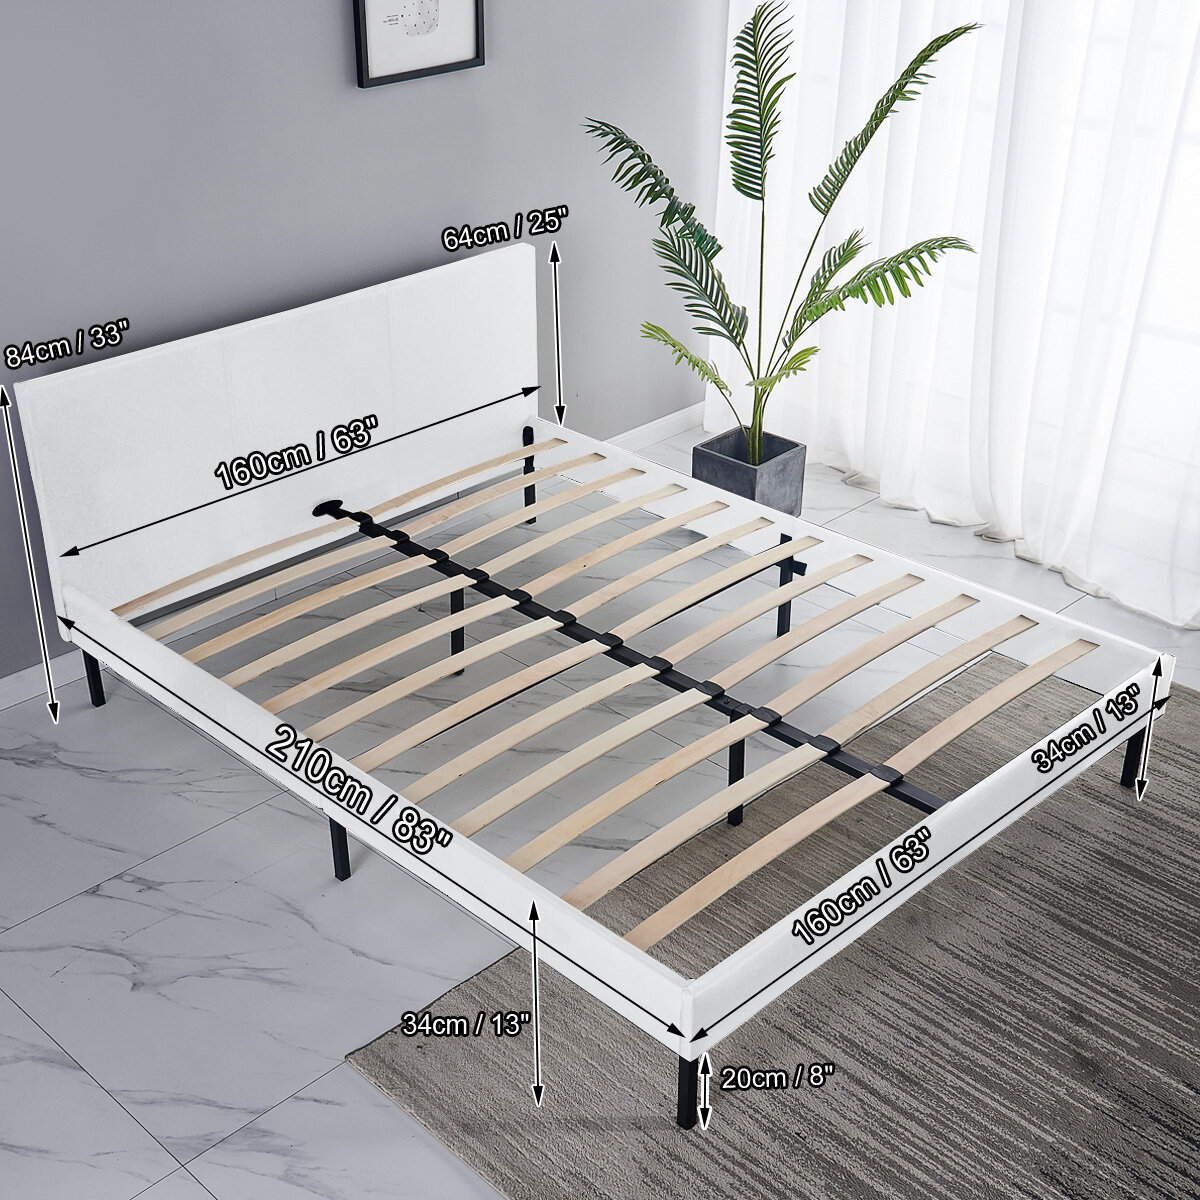 Image of Lusimo 83" x 63" x 33" Portable Metal Platform Bed Frame with Max Loading 250KG No Box Spring Needed for Home Bedroom